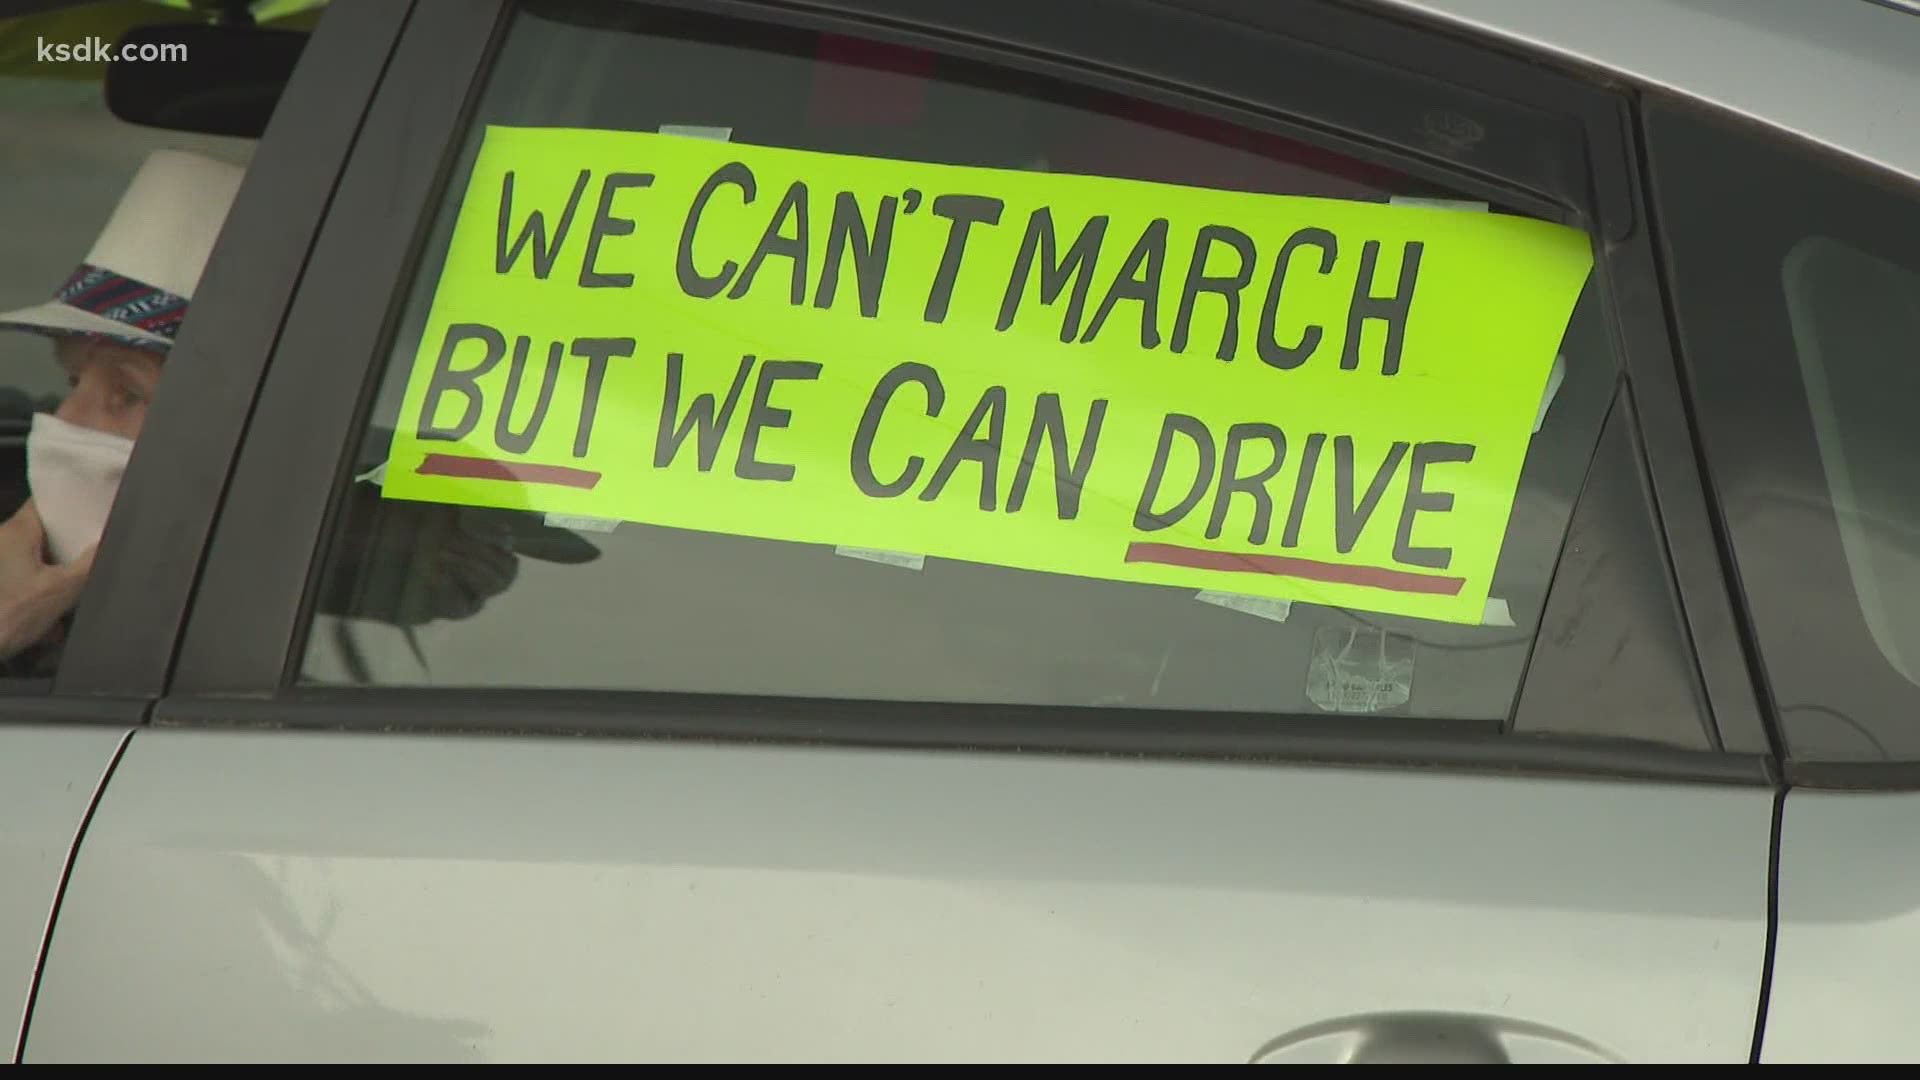 When marching wasn't an option, these protesters drove through University City to make their voices heard